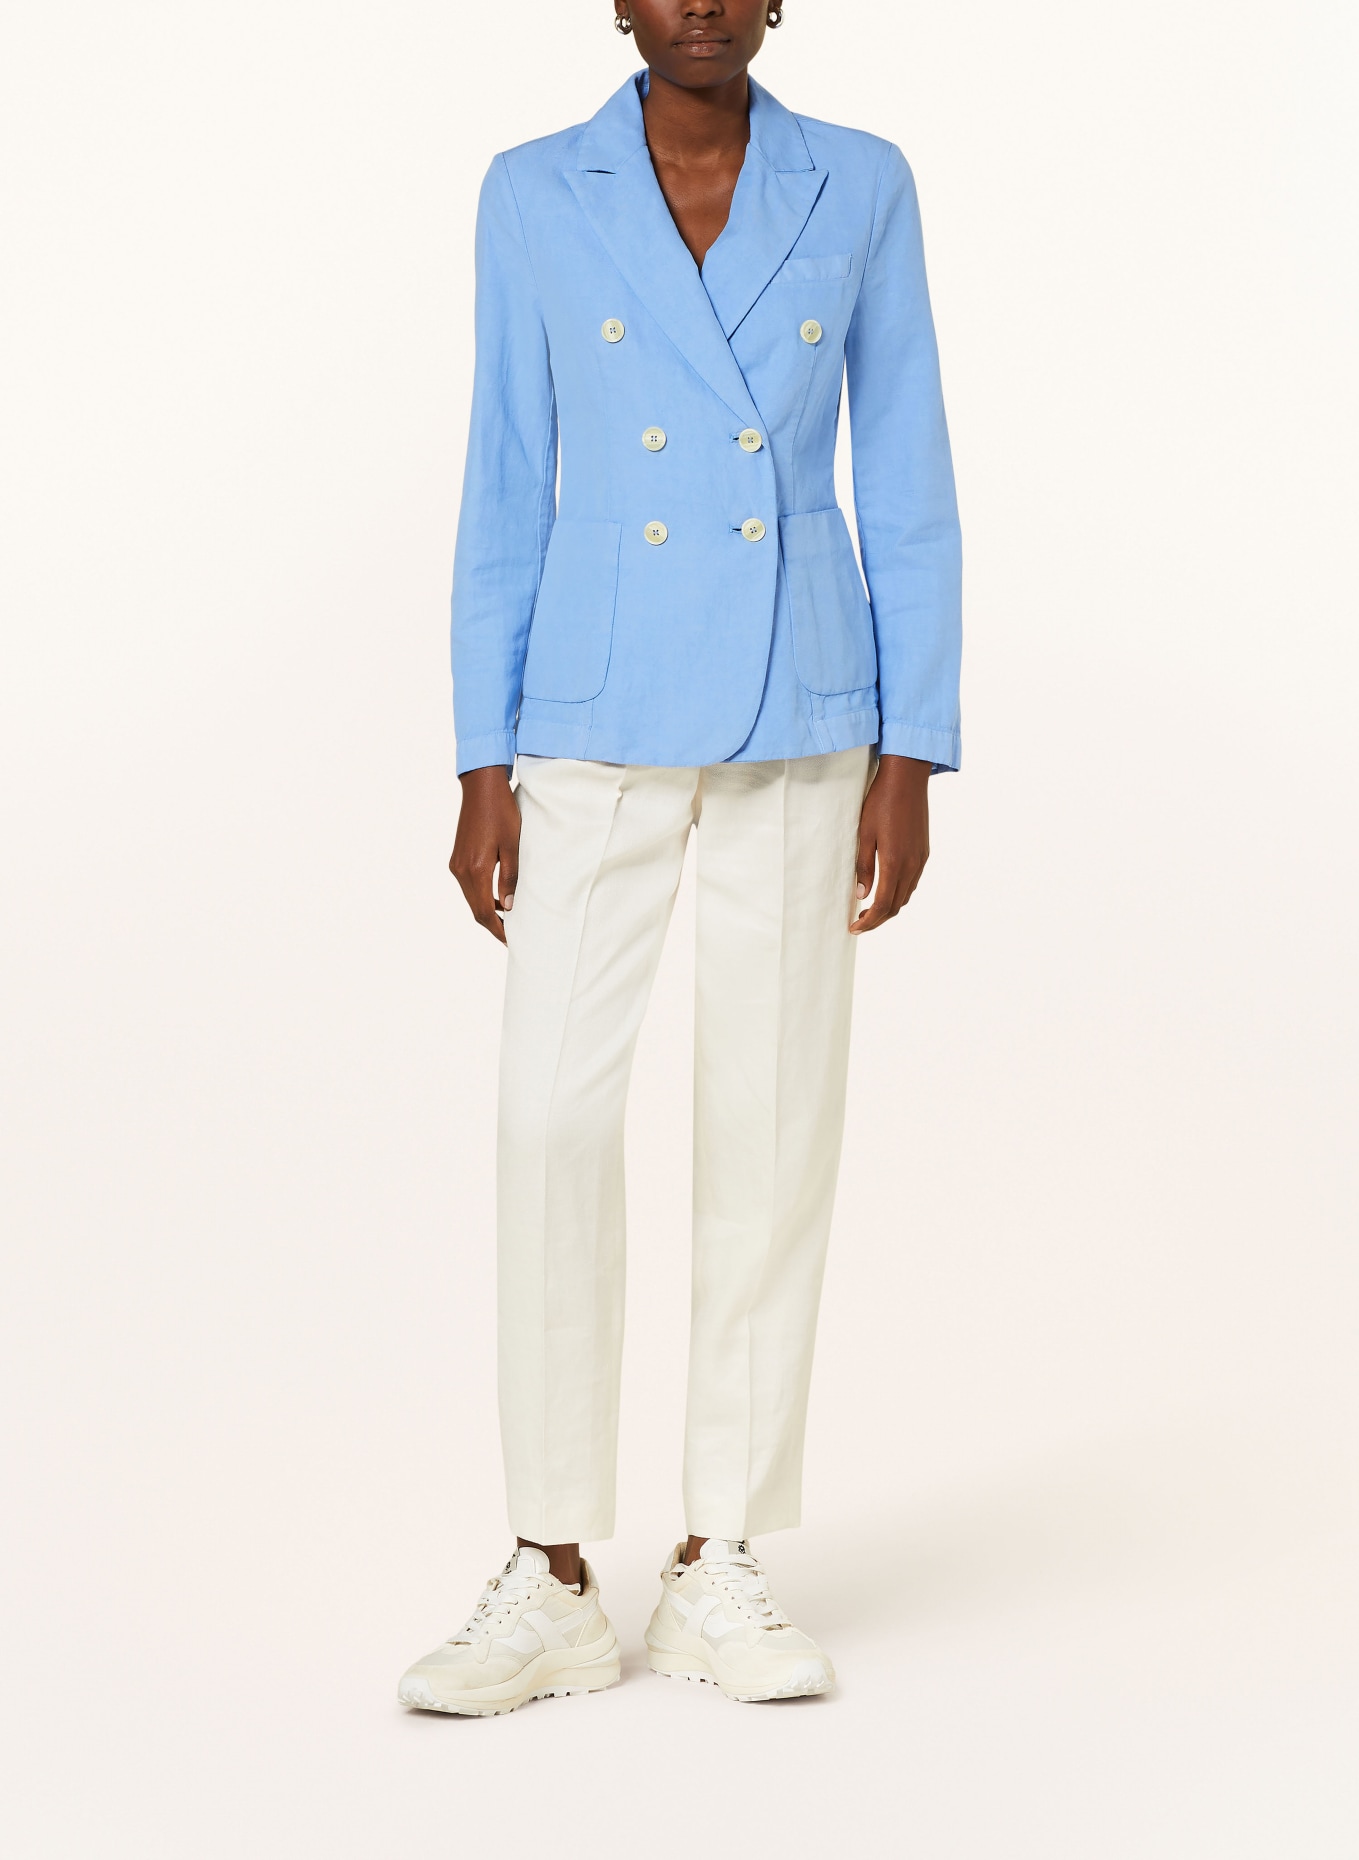 ROSSO35 Blazer with linen, Color: BLUE (Image 2)